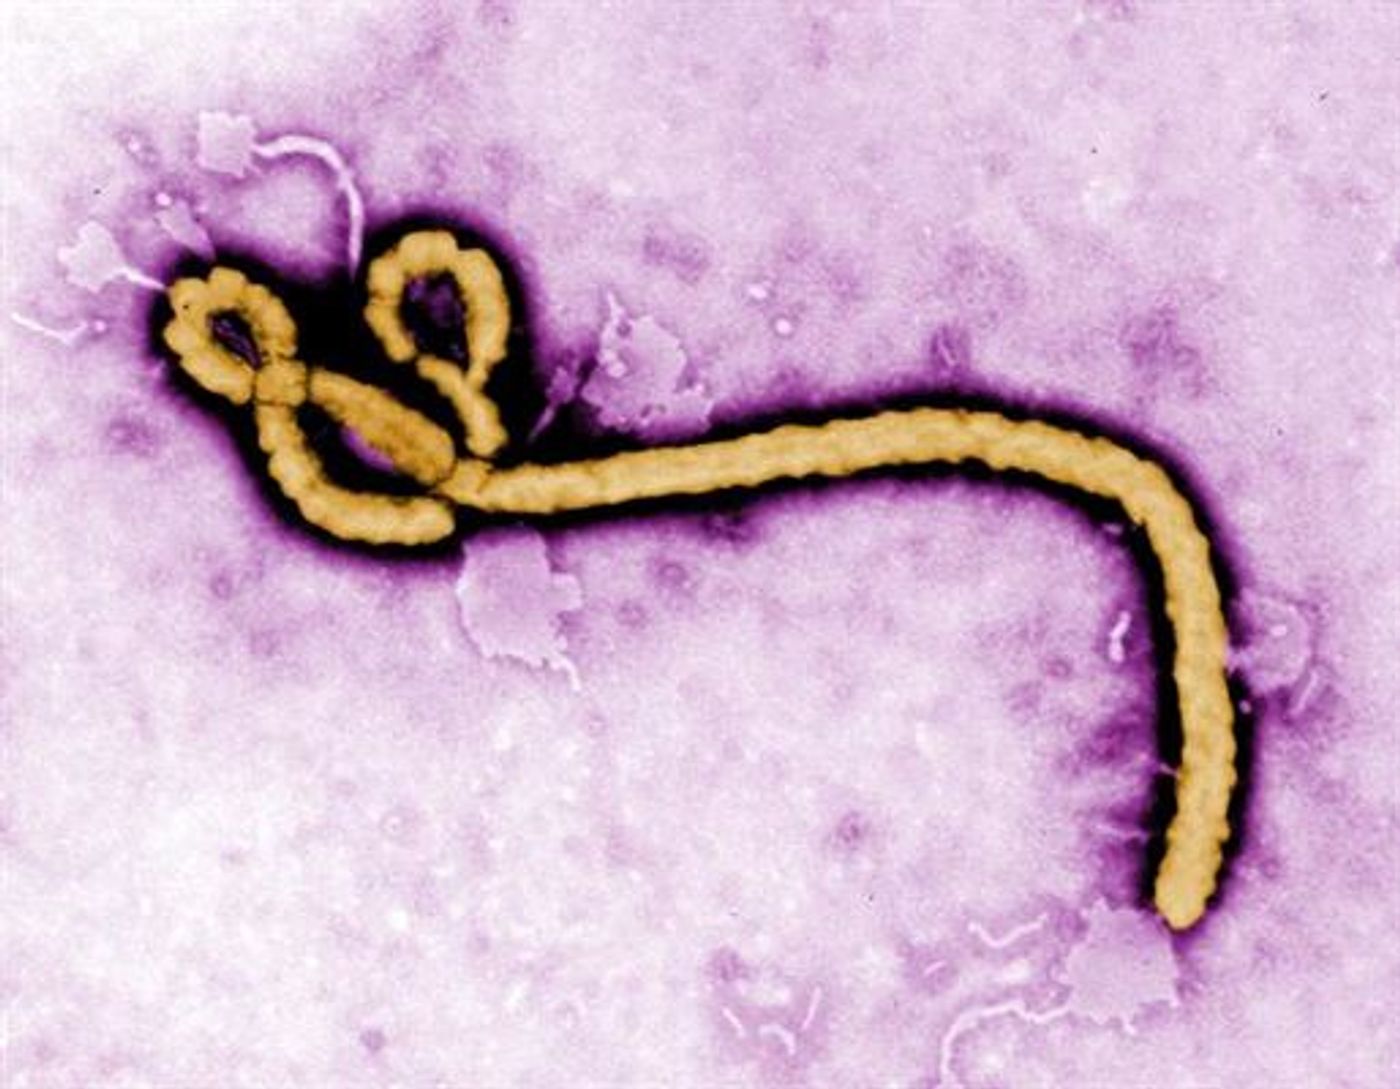 This colorized transmission electron micrograph shows some of the ultrastructural morphology of an Ebola virus virion. CDC photo by microbiologist Frederick A. Murphy, National Center for Infectious Diseases, Special Pathogens Branch